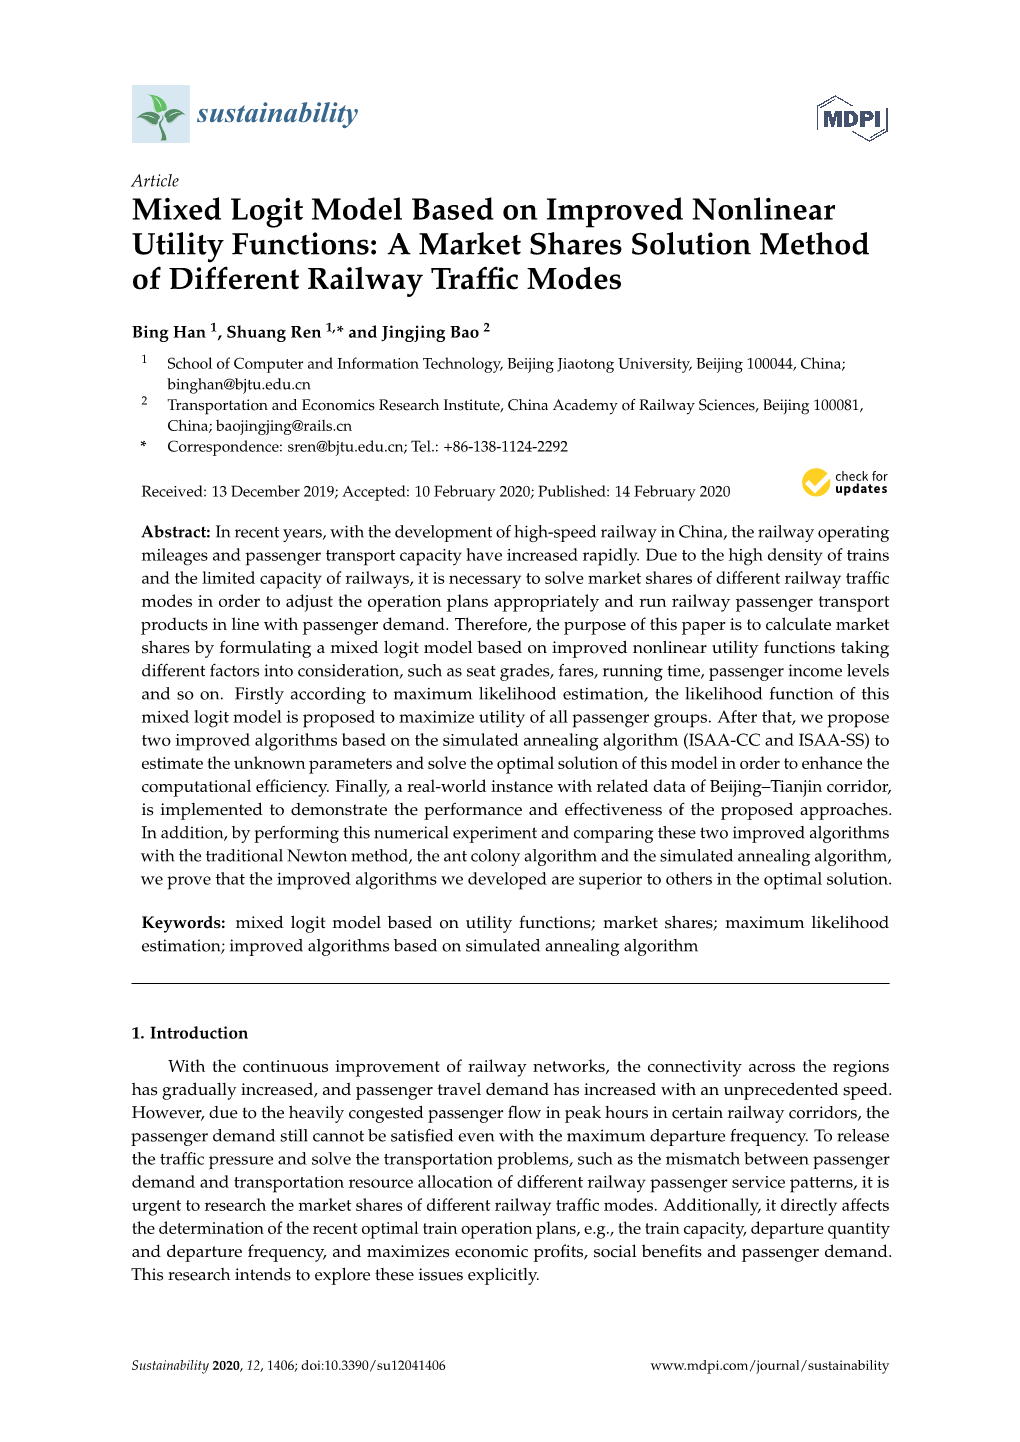 Mixed Logit Model Based on Improved Nonlinear Utility Functions: a Market Shares Solution Method of Different Railway Trafﬁc Modes